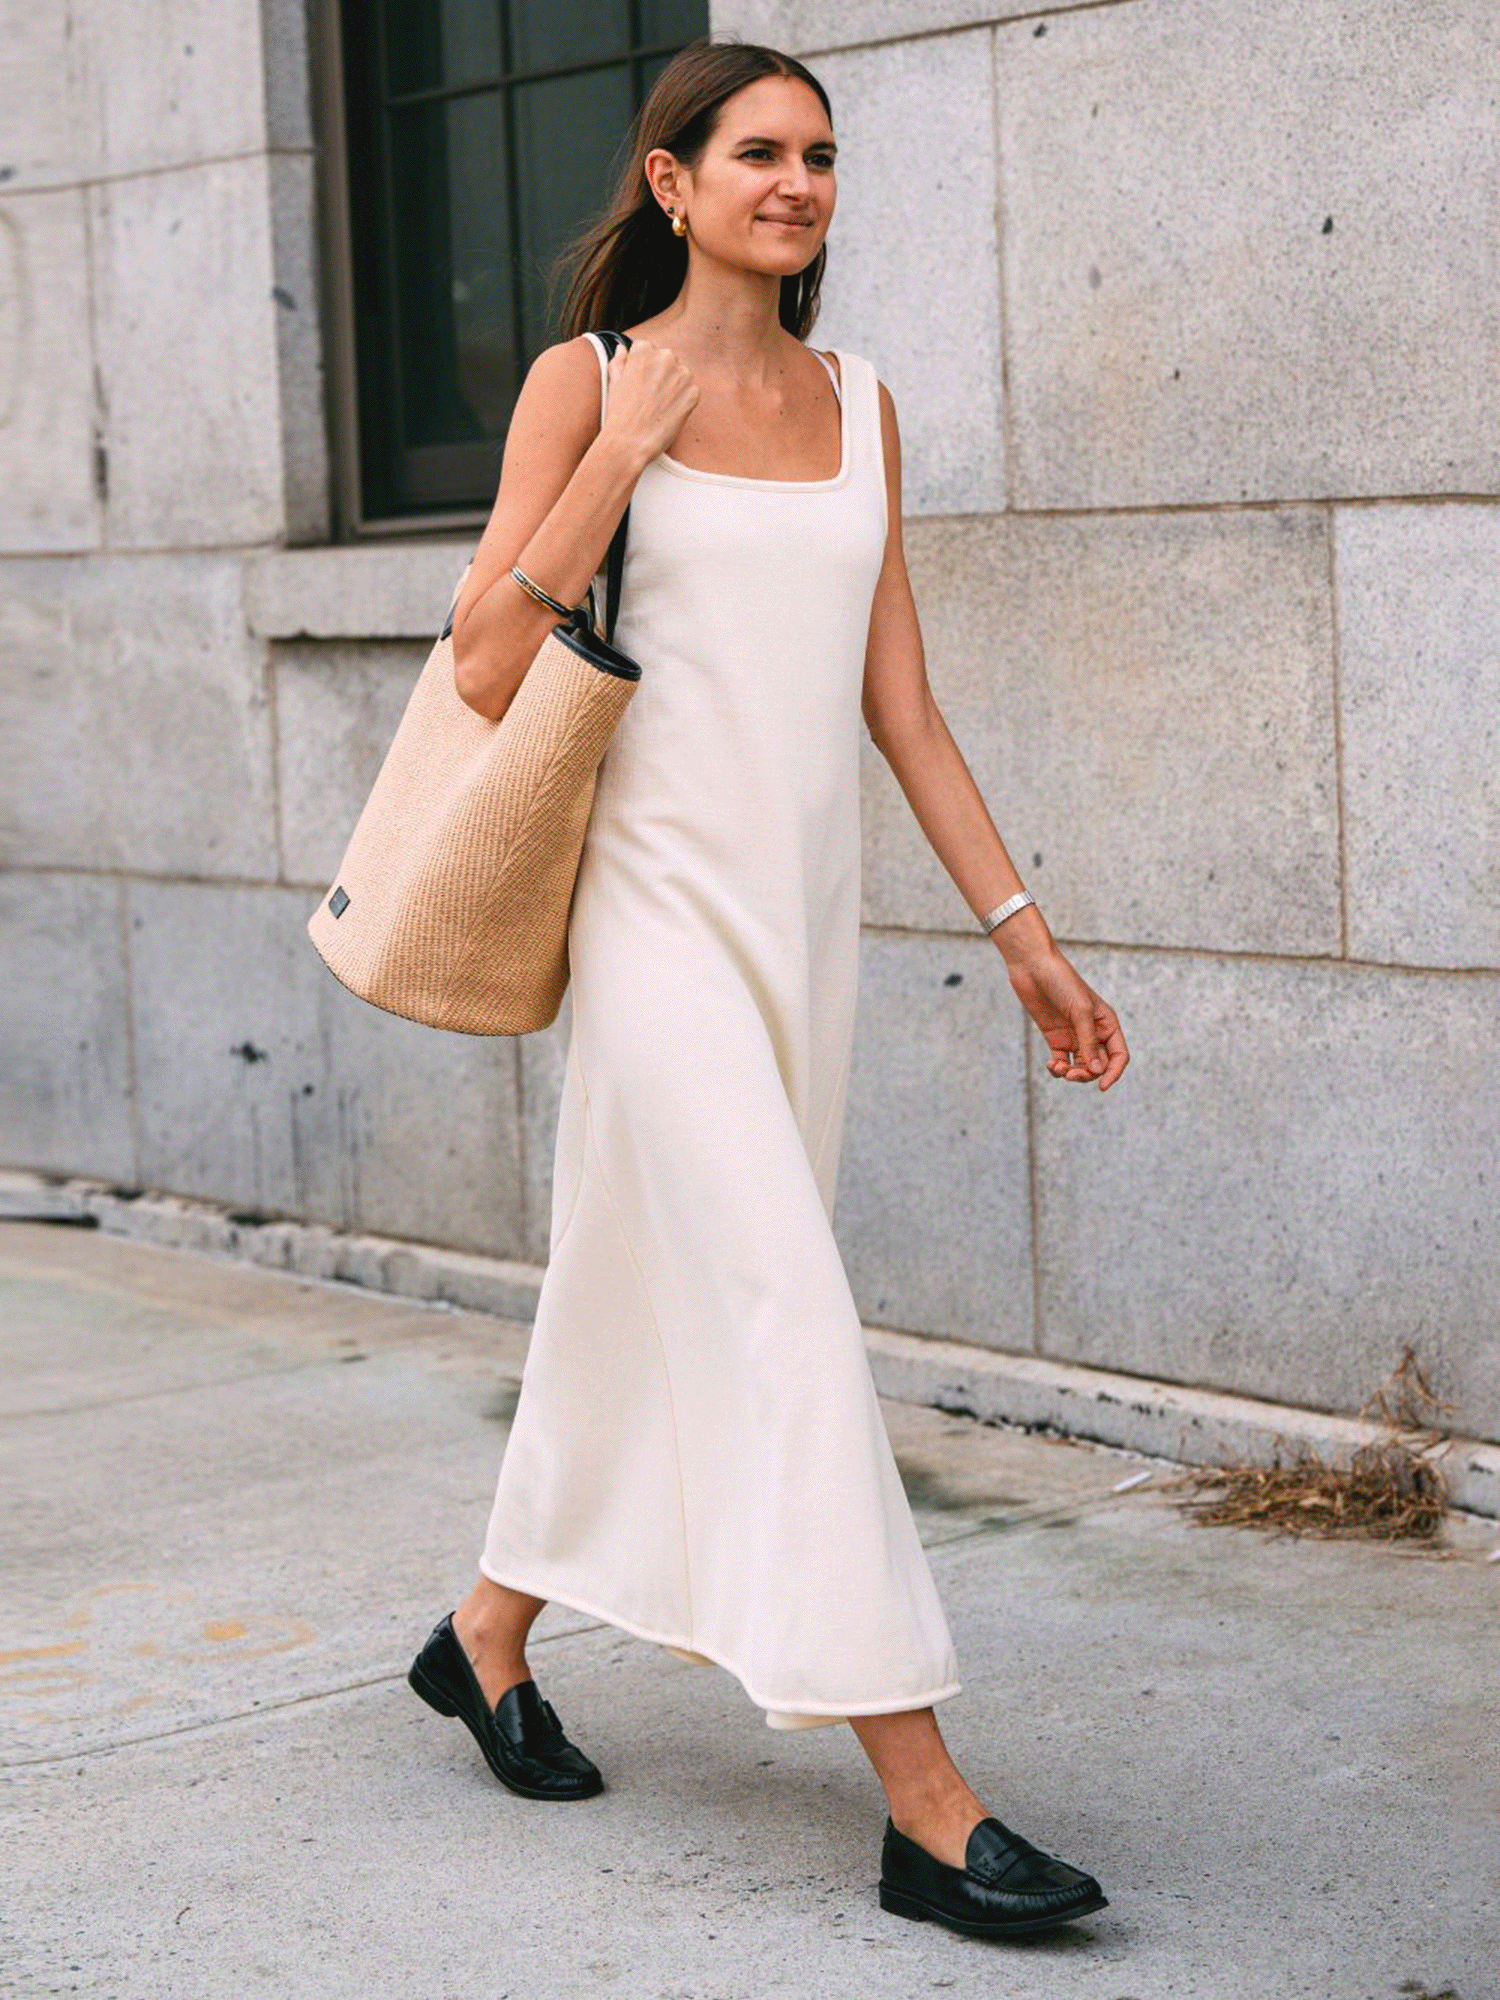 Daily Look: White Eyelet Dress + Summer White Dresses Under $100 -  Cathedrals & Cafes Blog